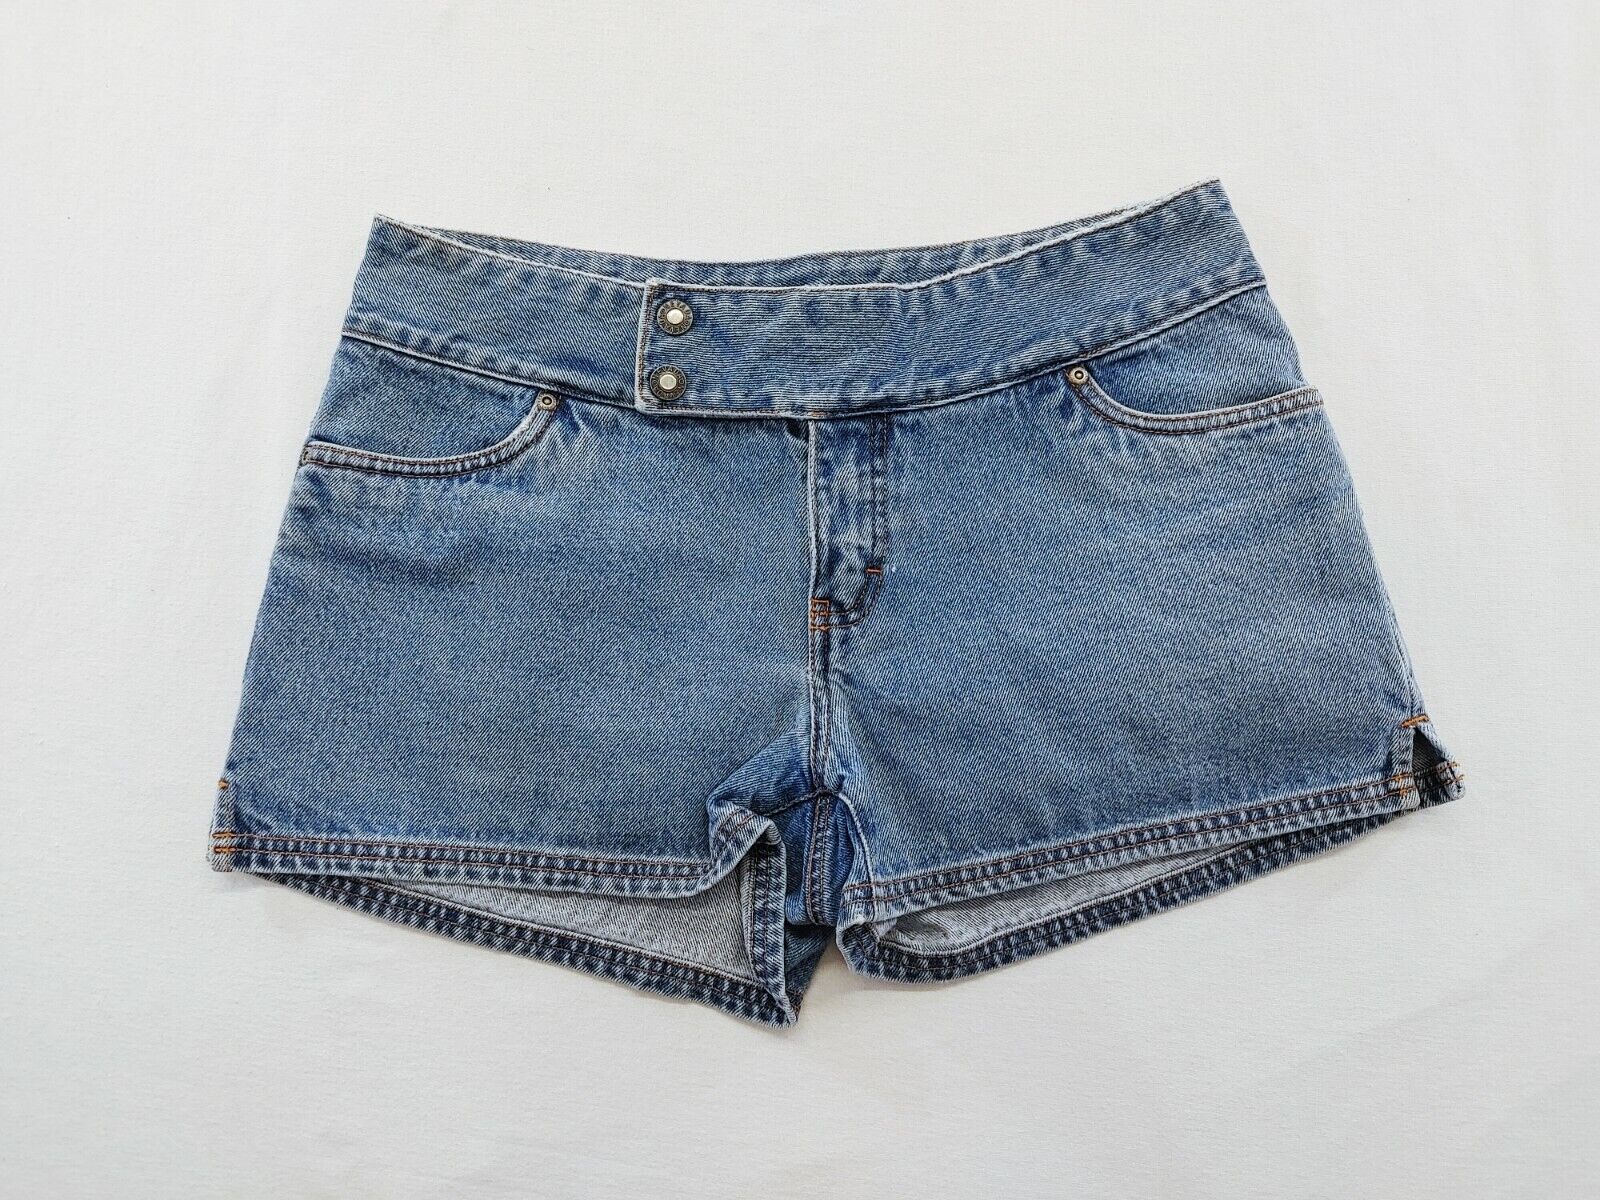 Primary image for Nevada Women's Blue Jean Shorts Size 12 Cotton Snap Button Closure Denim